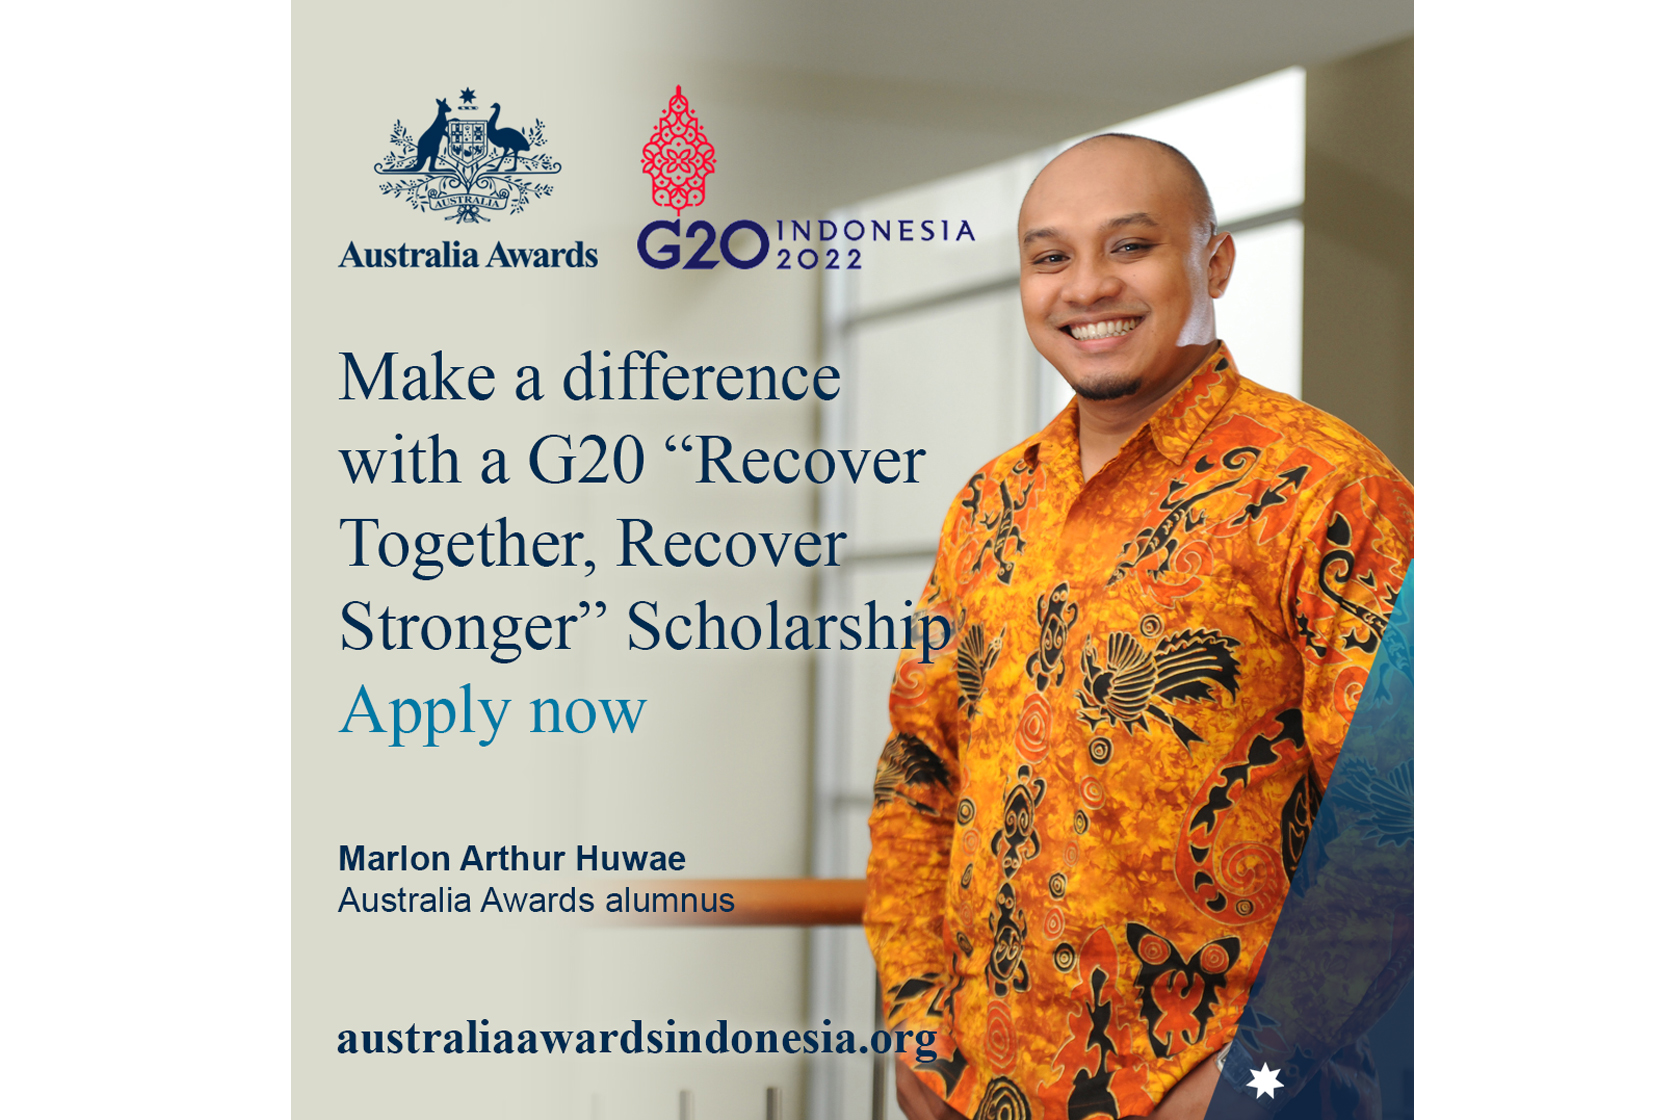 Apply Now for a G20 “Recover Together, Recover Stronger” Scholarship